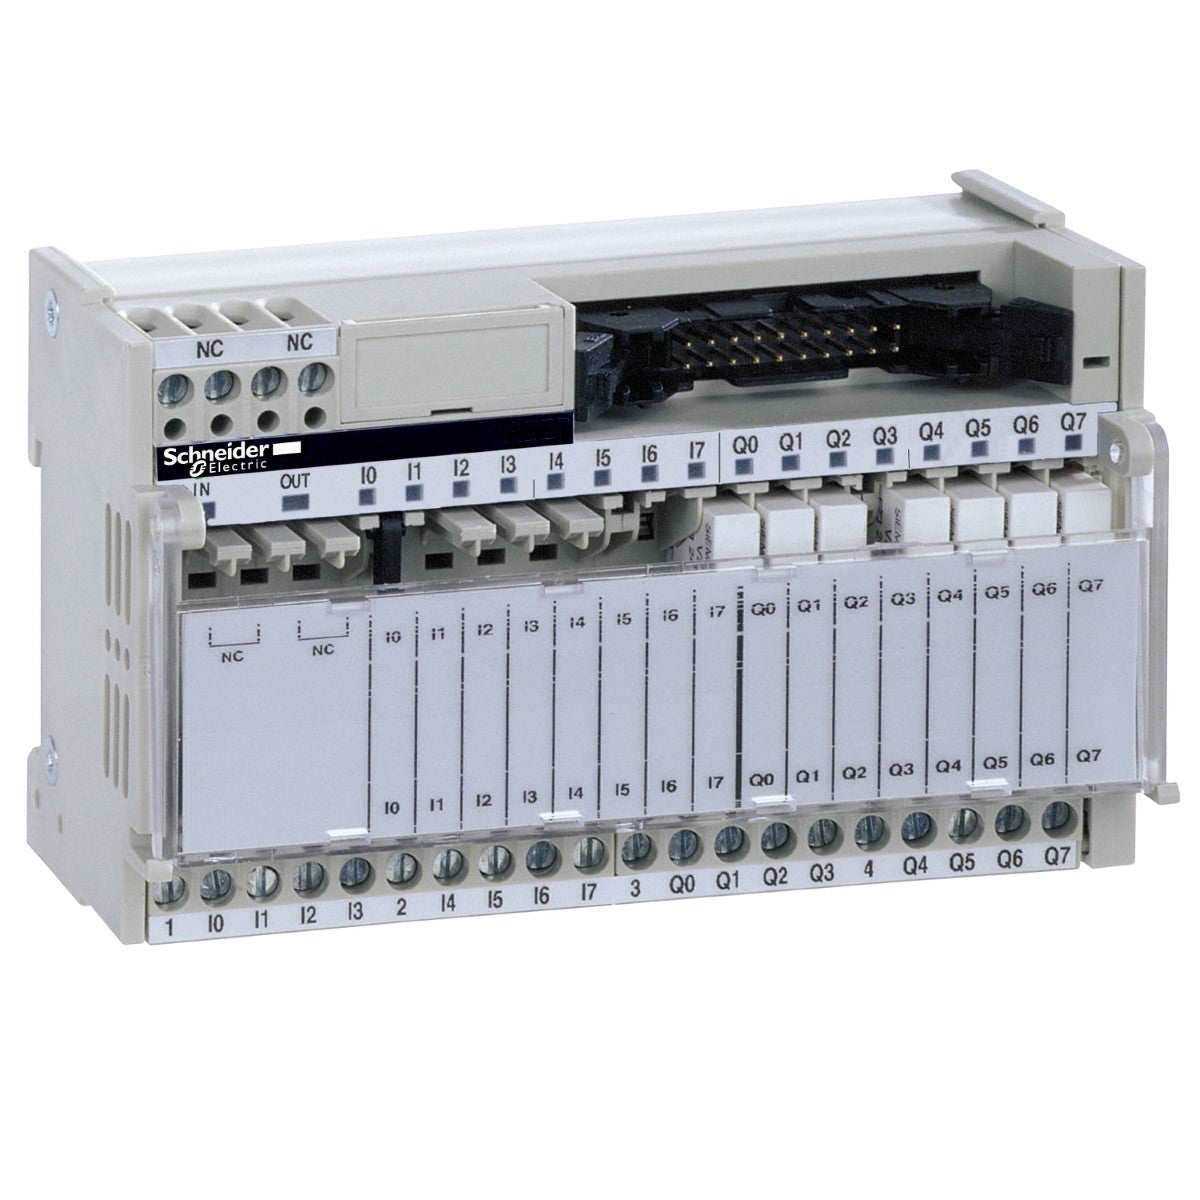 Sub-base with plug-in electromechanical relay ABE7, 16 channels, relay 5 mm